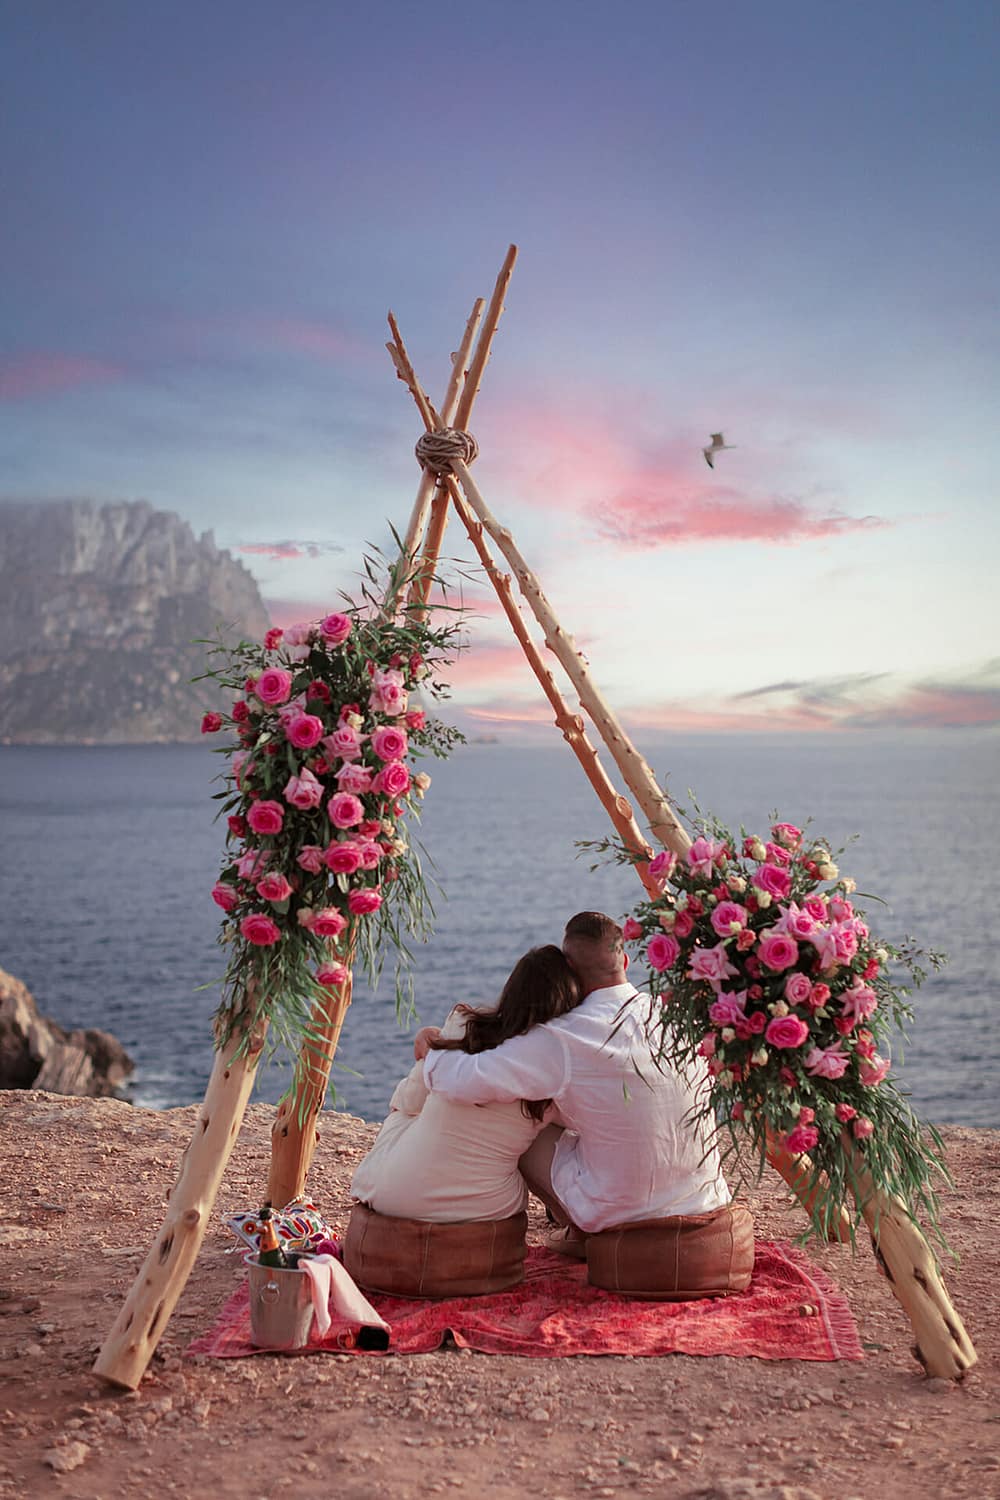 photo couple embracing at sunset surrounded by flowers with photographer in ibiza